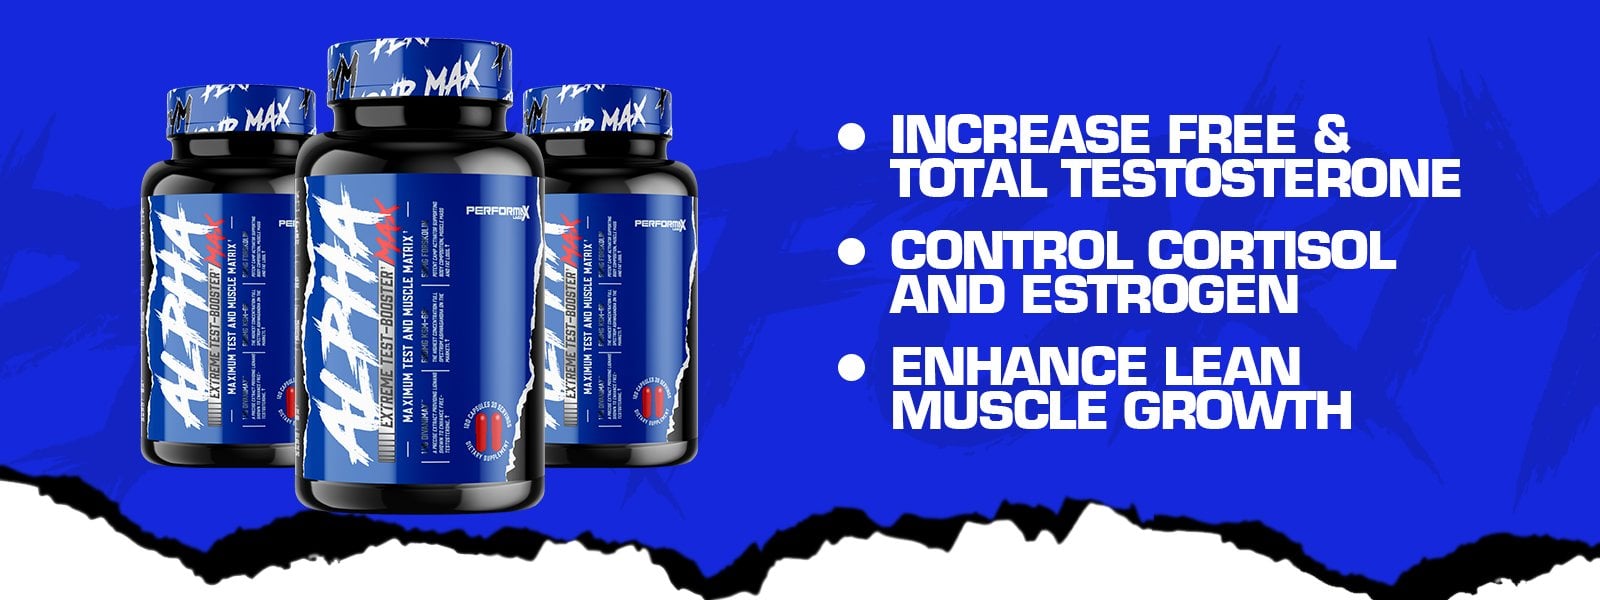 Performax capsules label highlighting increased testosterone, cortisol control, estrogen regulation, and lean muscle growth.